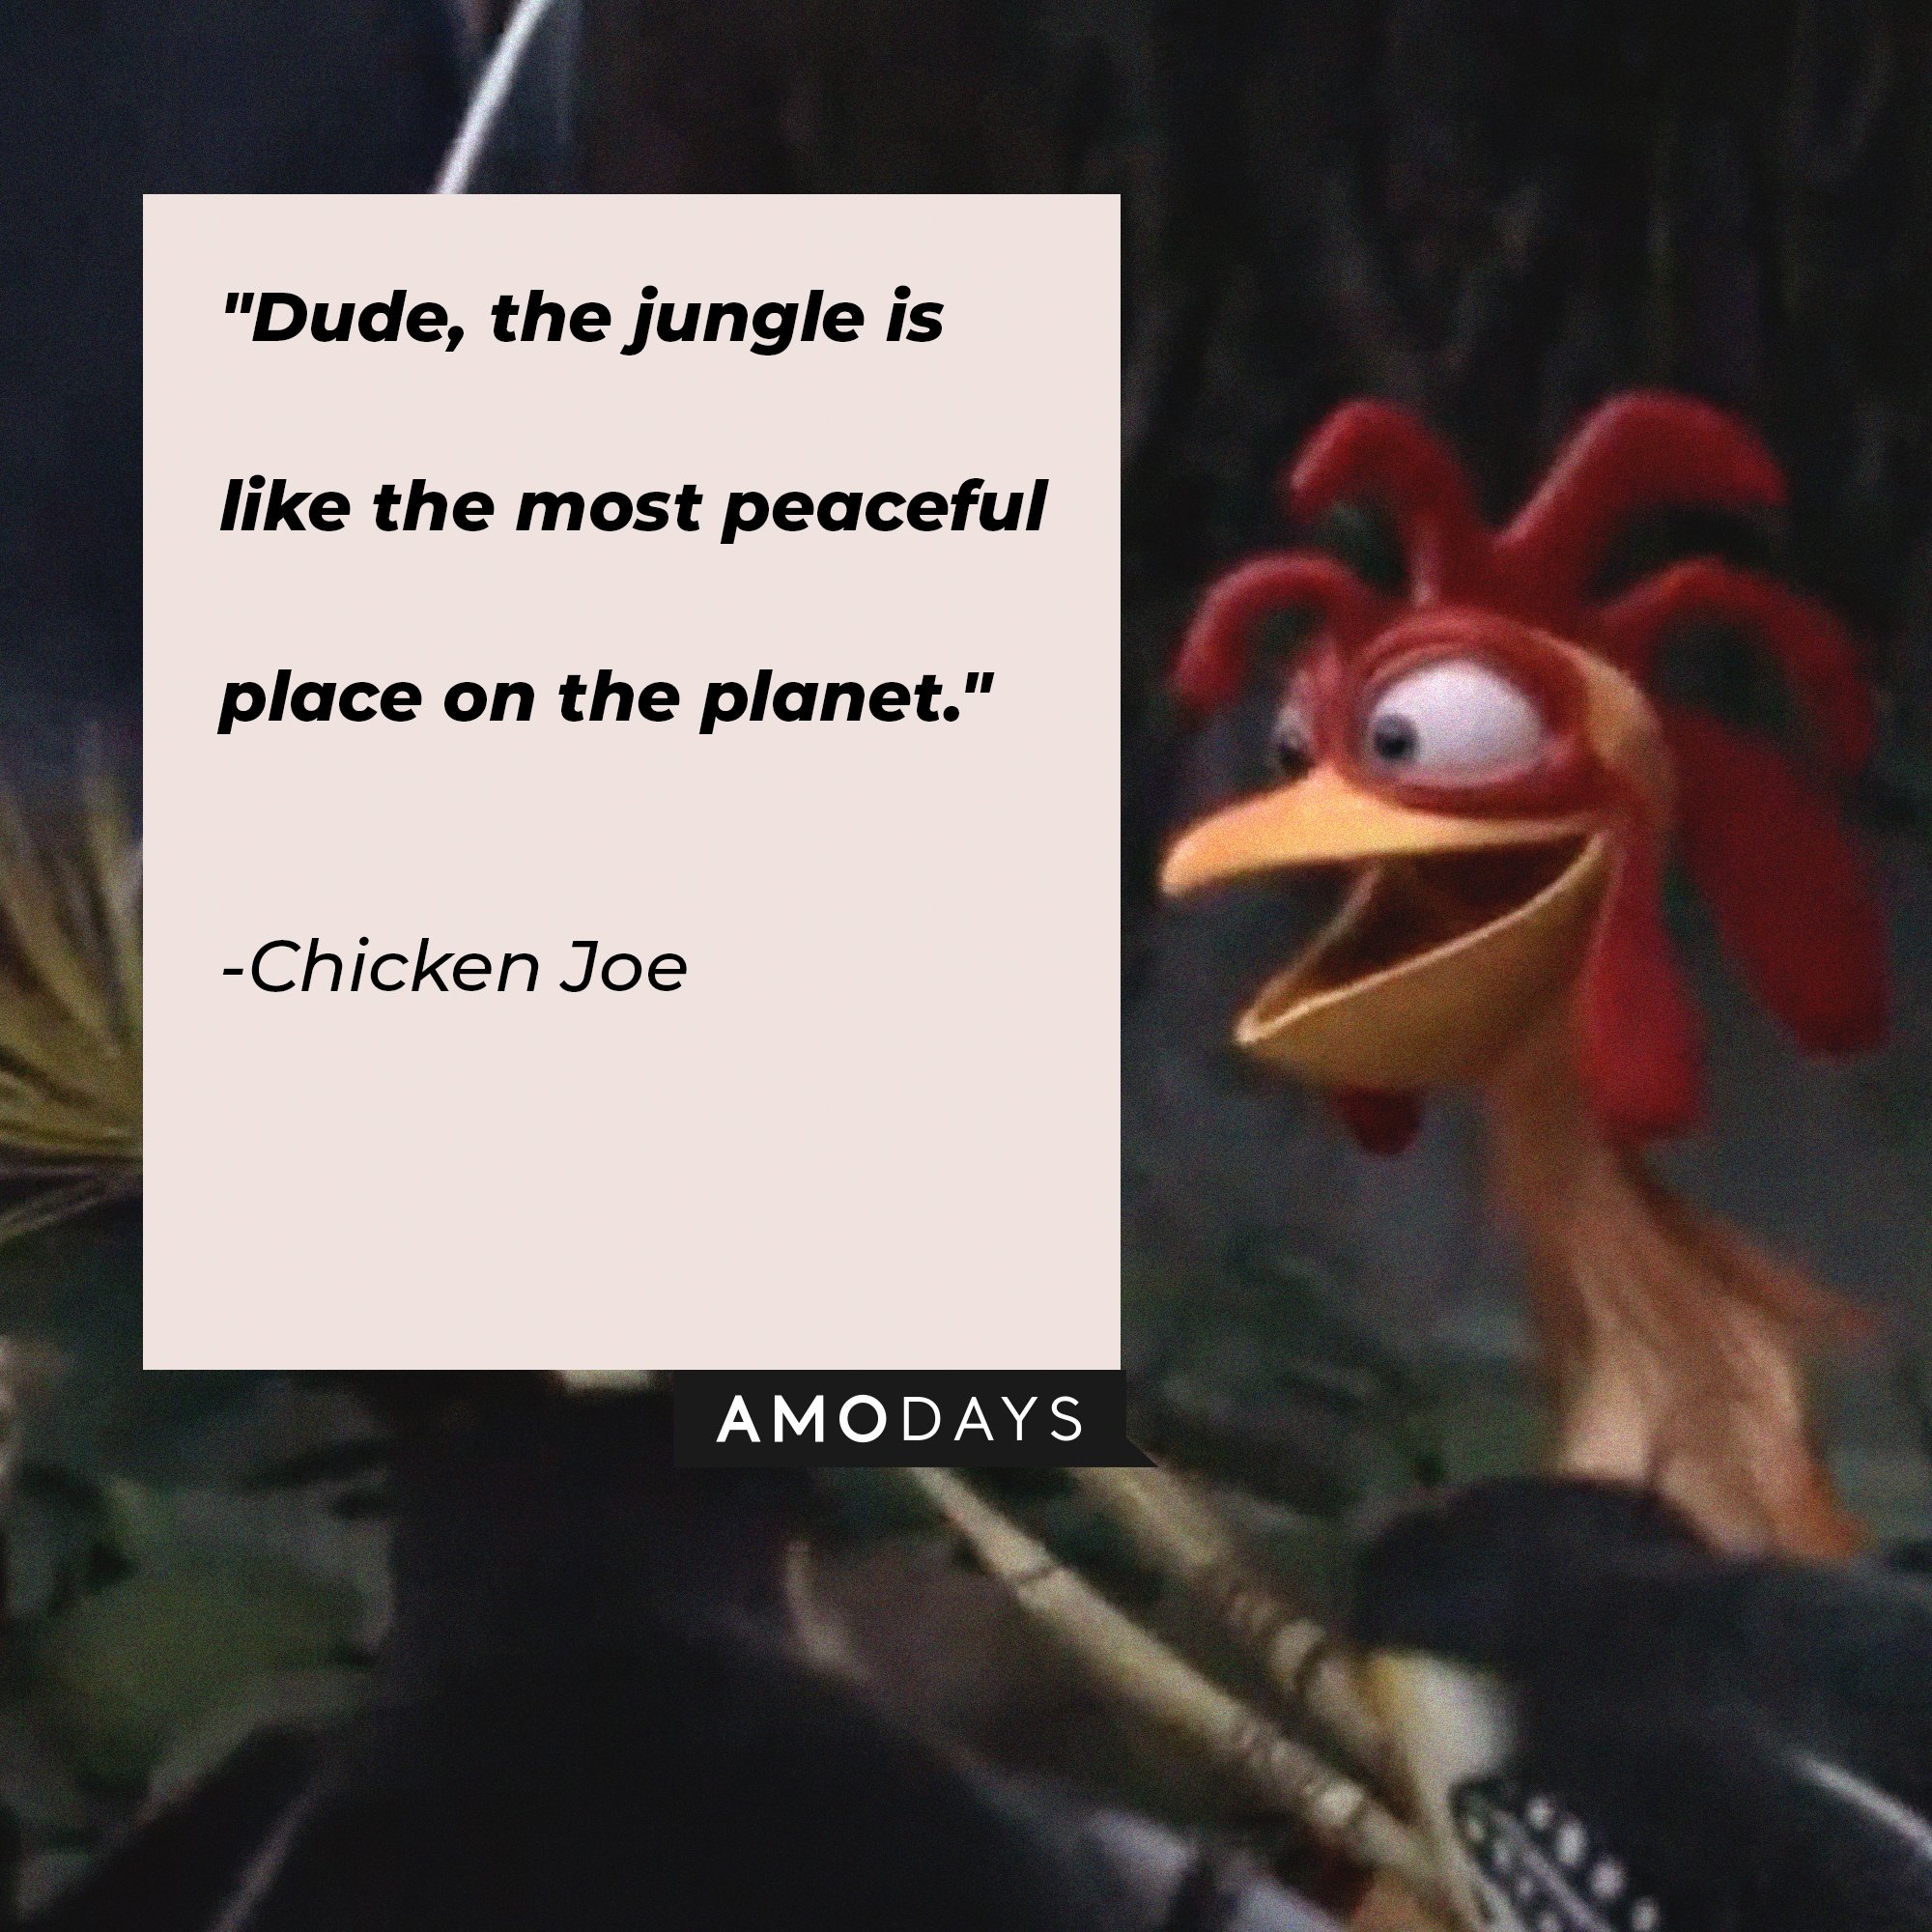 Chicken Joe's quote: “Dude, the jungle is like the most peaceful place on the planet." | Image: AmoDays